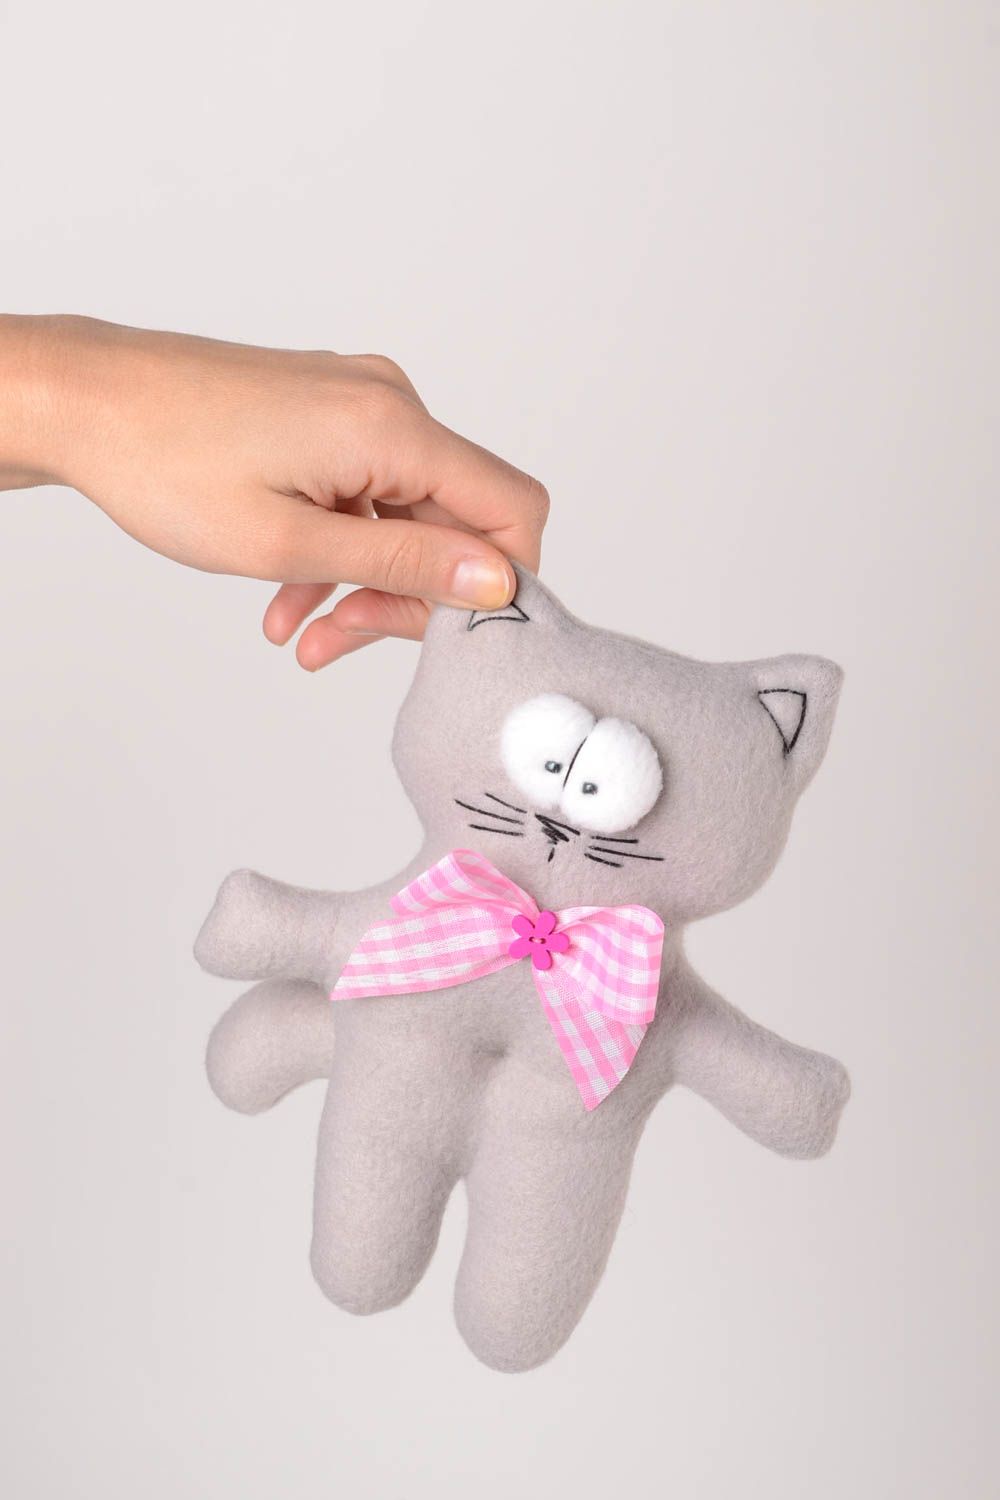 Handmade baby toy fleece handmade toy soft toy grey cat with bow toy for kids photo 2